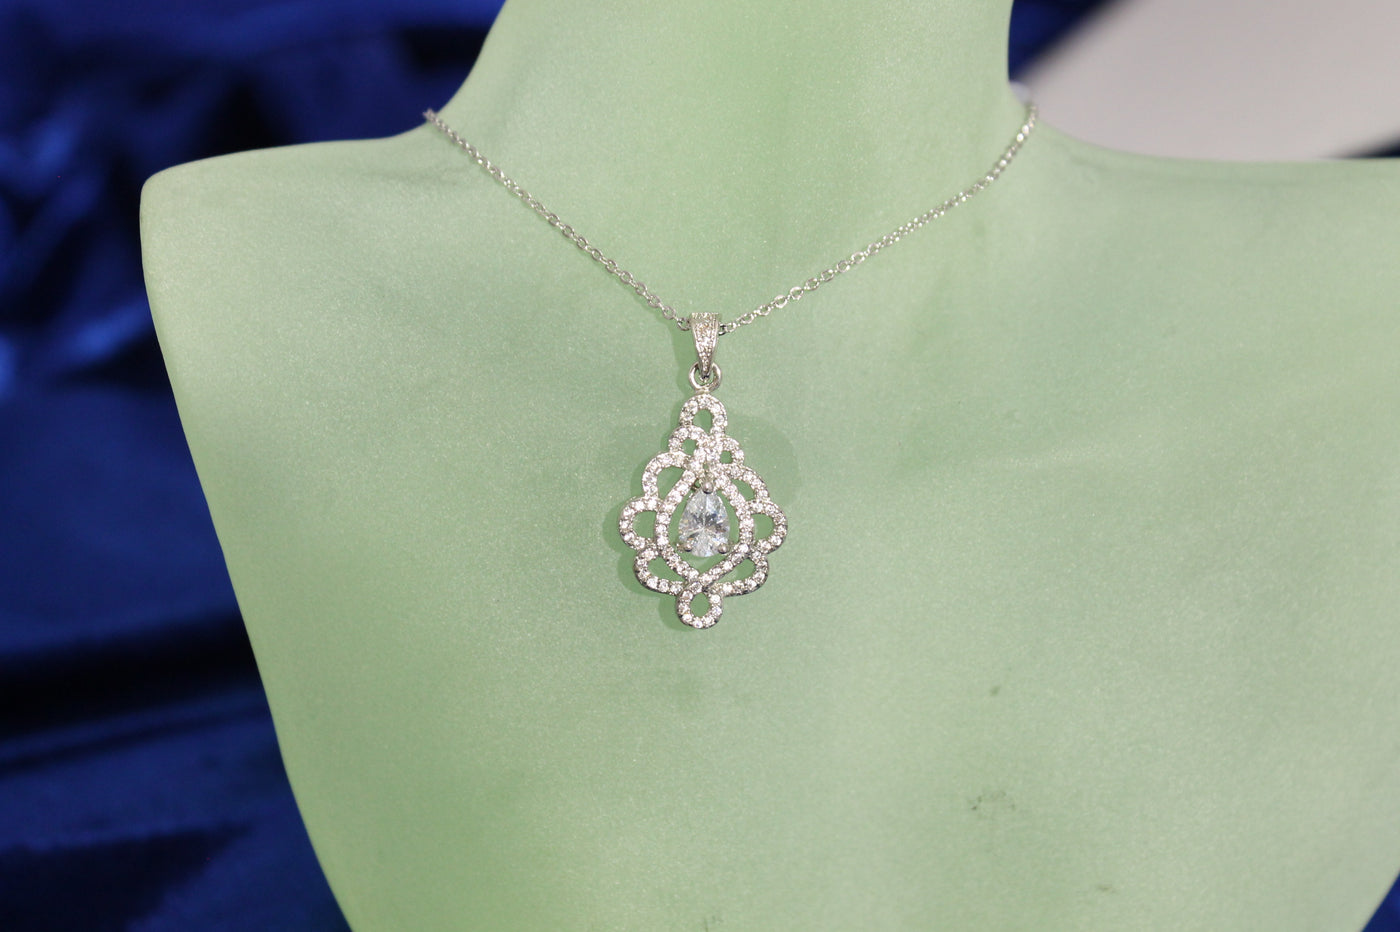 Pave Set Cubic Zirconia "Lace" Pendant Necklace in Silver Tone